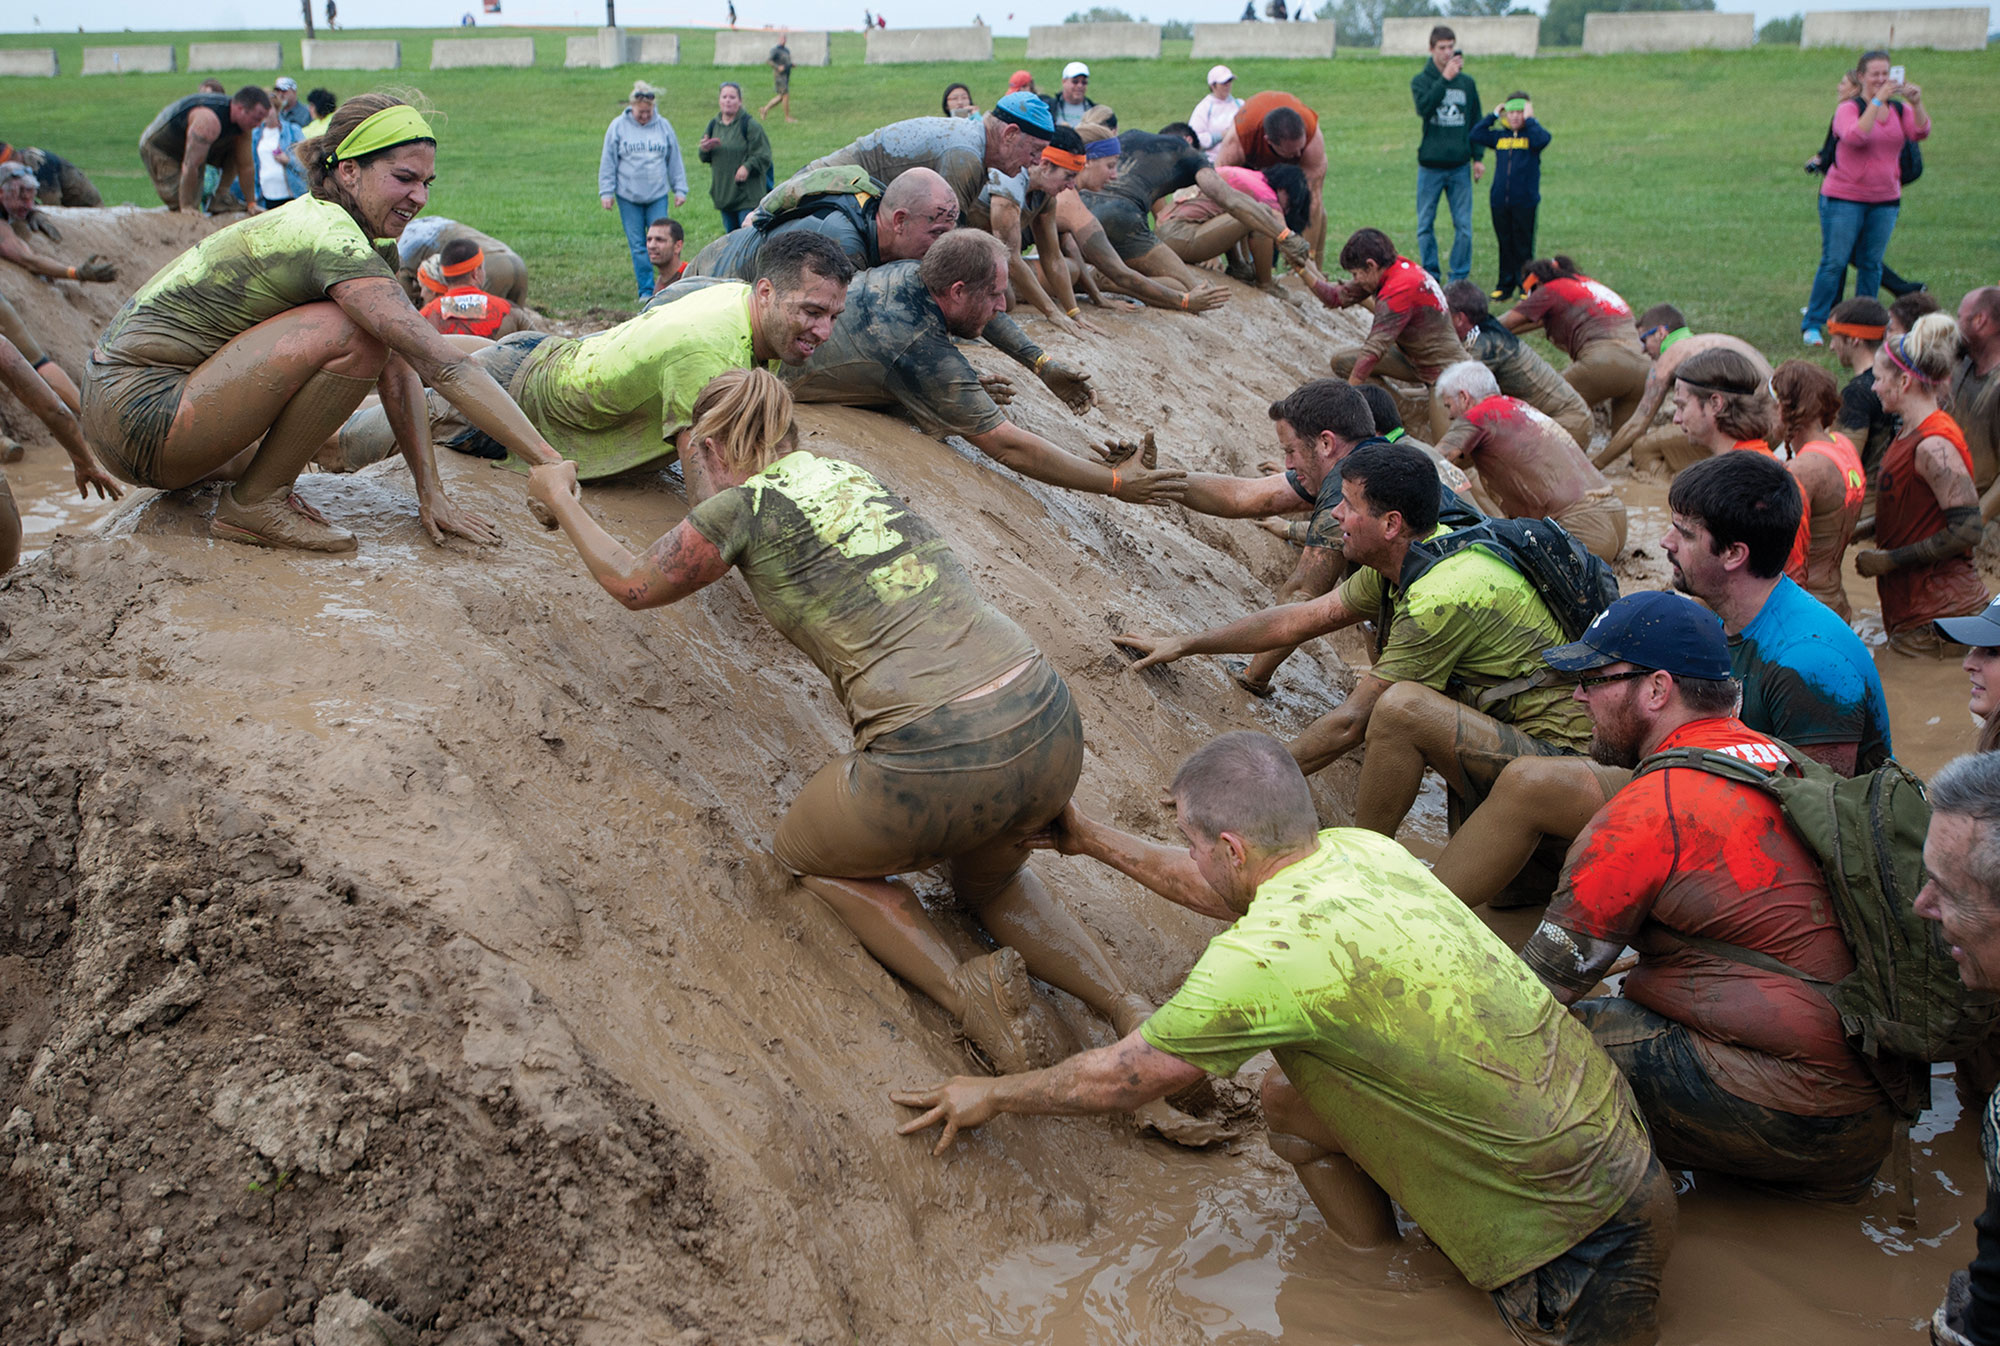 A photo shows people helping other people cross a mud hurdle.